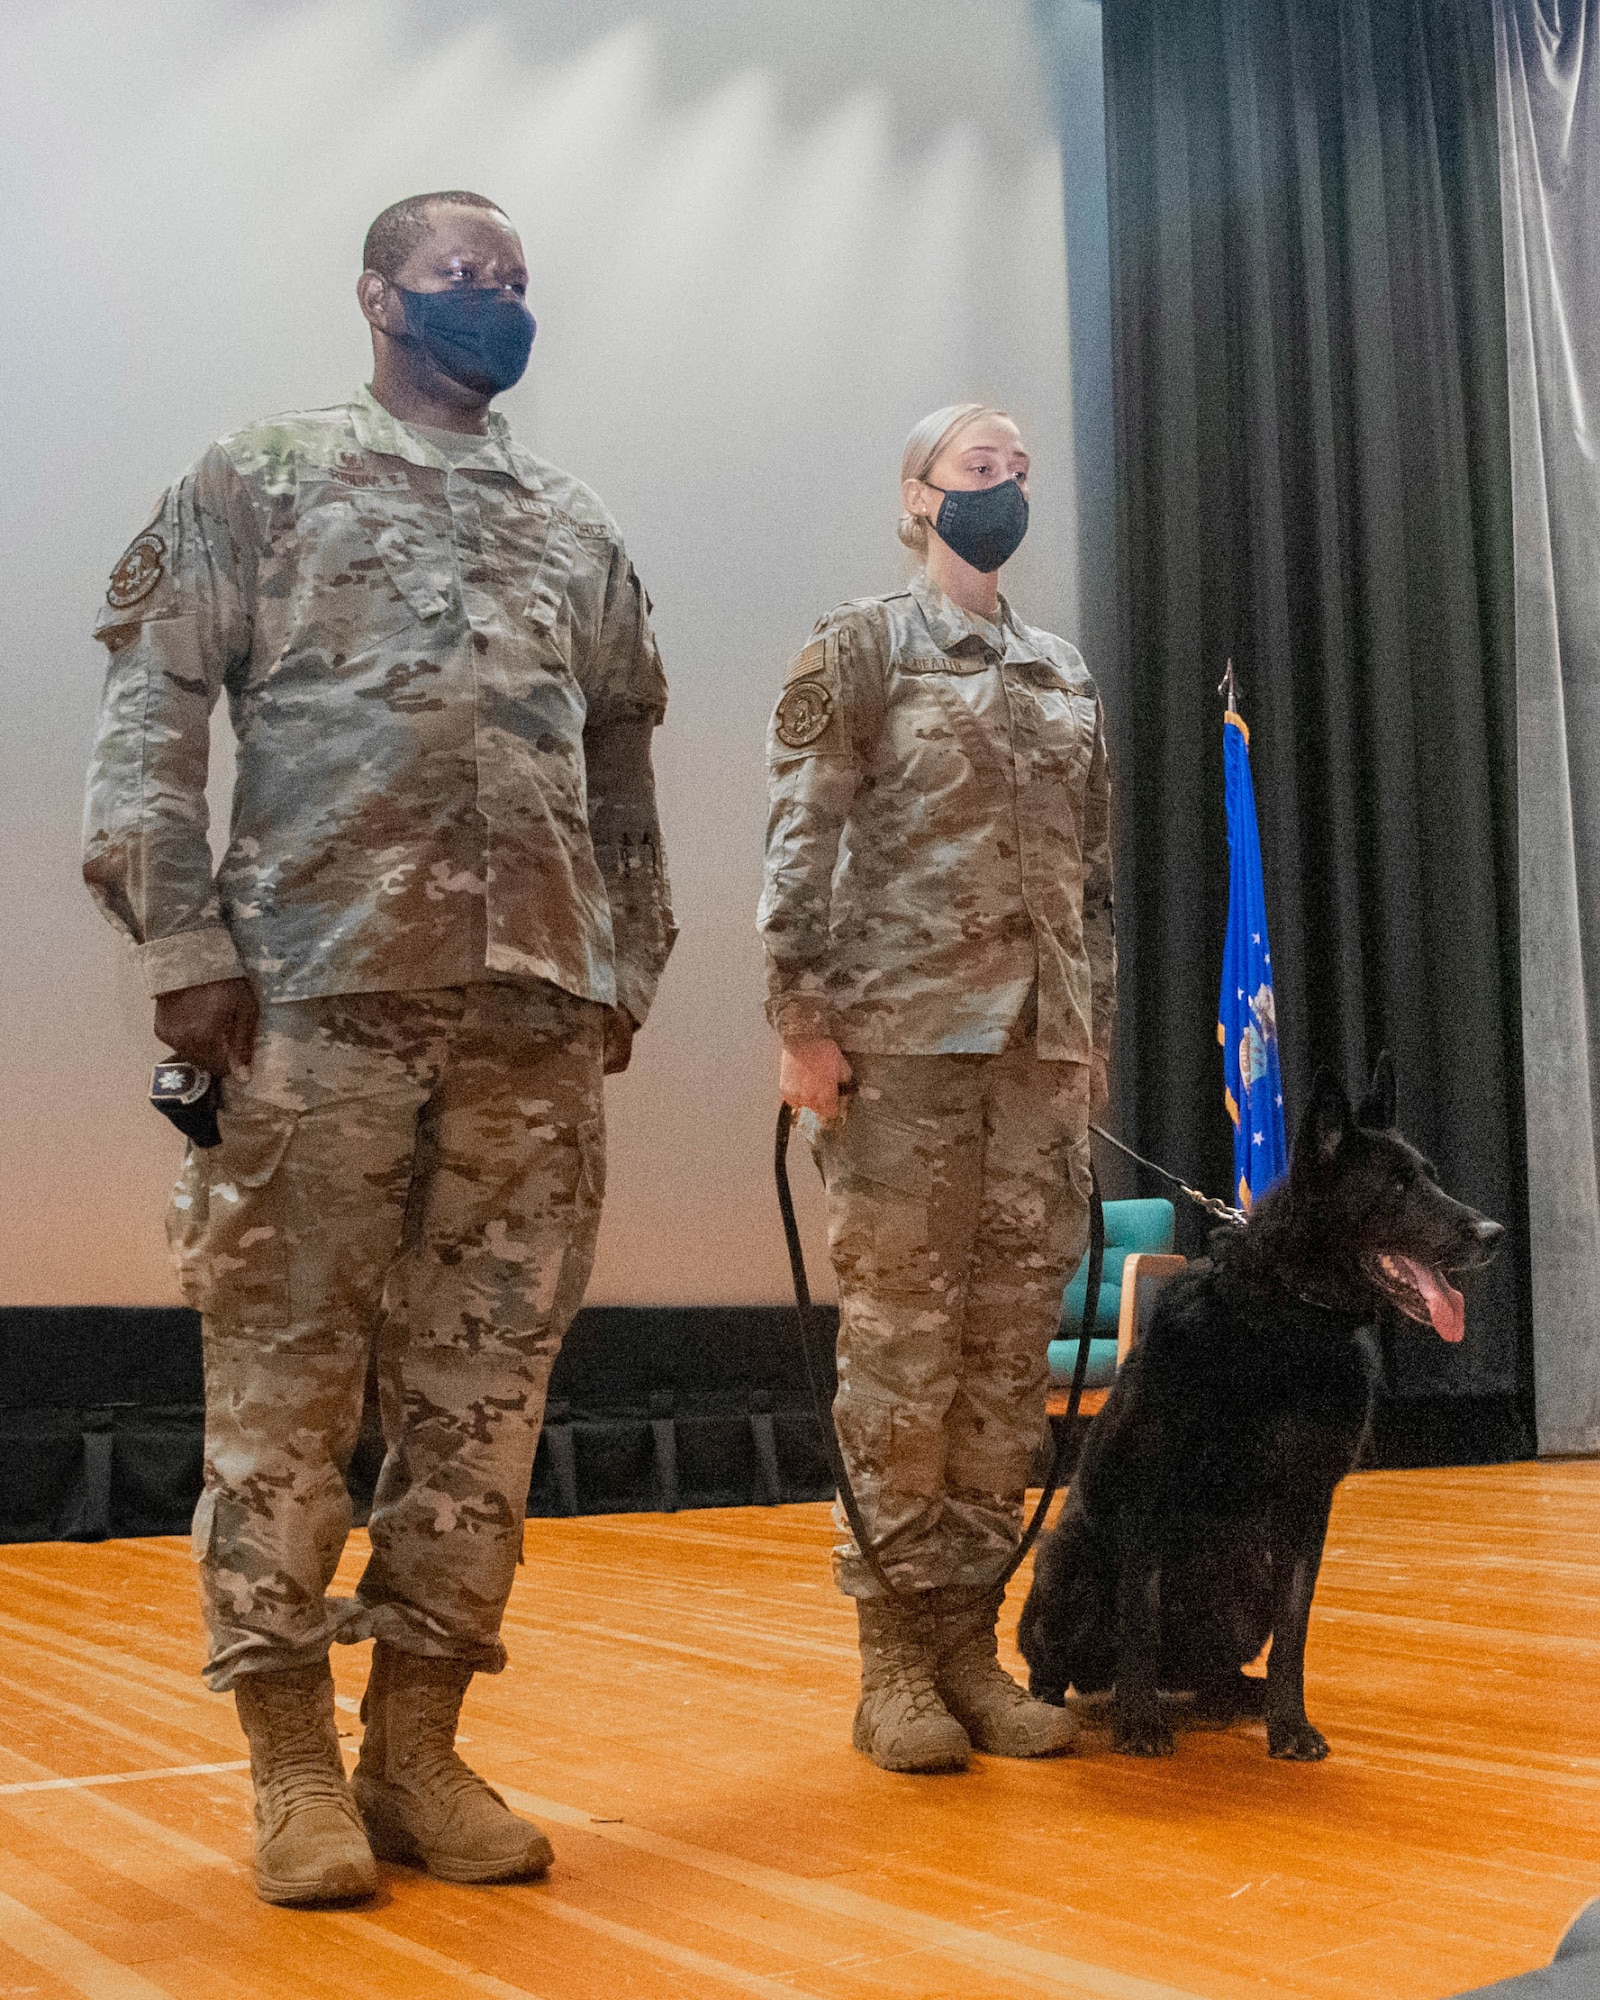 Lt. Col. Schneider Rislin, left, 436th Security Forces Squadron commander, stands with Tech. Sgt. Ashley Beattie, 436th SFS unit deployment manager, and Military Working Dog Vito W285 as the MWD certificate of meritorious service is read during Vito’s retirement ceremony at the base theater on Dover Air Force Base, Delaware, Nov. 9, 2021. During his six years of service, MWD Vito helped provide drug detection sweeps for 9,000 vehicles, 300 facilities and assisted the Air Force Office of Special Investigations in a dorm raid and successfully found drugs and drug paraphernalia. (U.S. Air Force photo by Tech. Sgt. Nicole Leidholm)